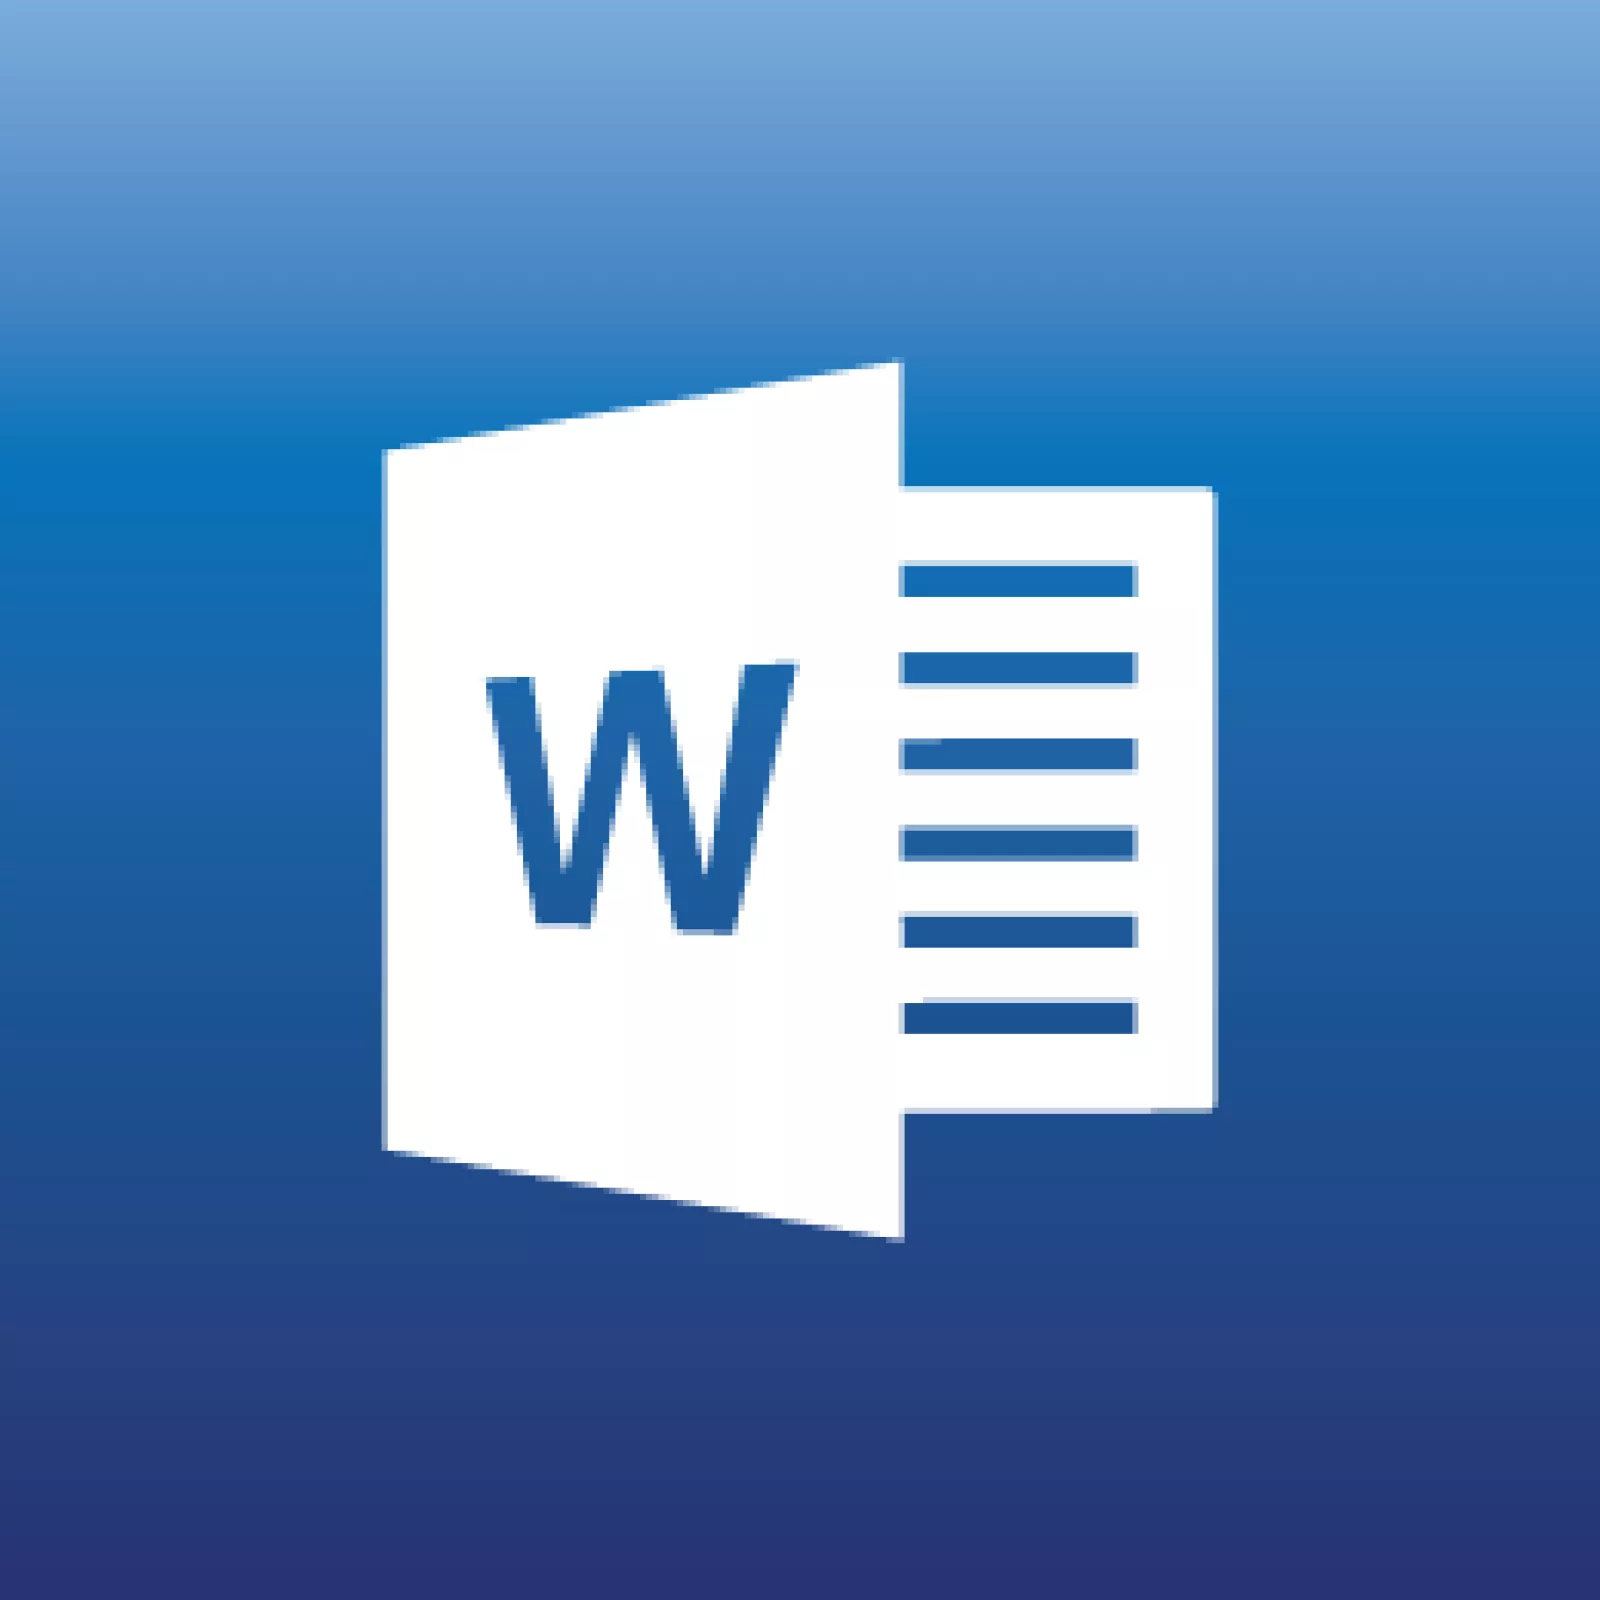 Word icon